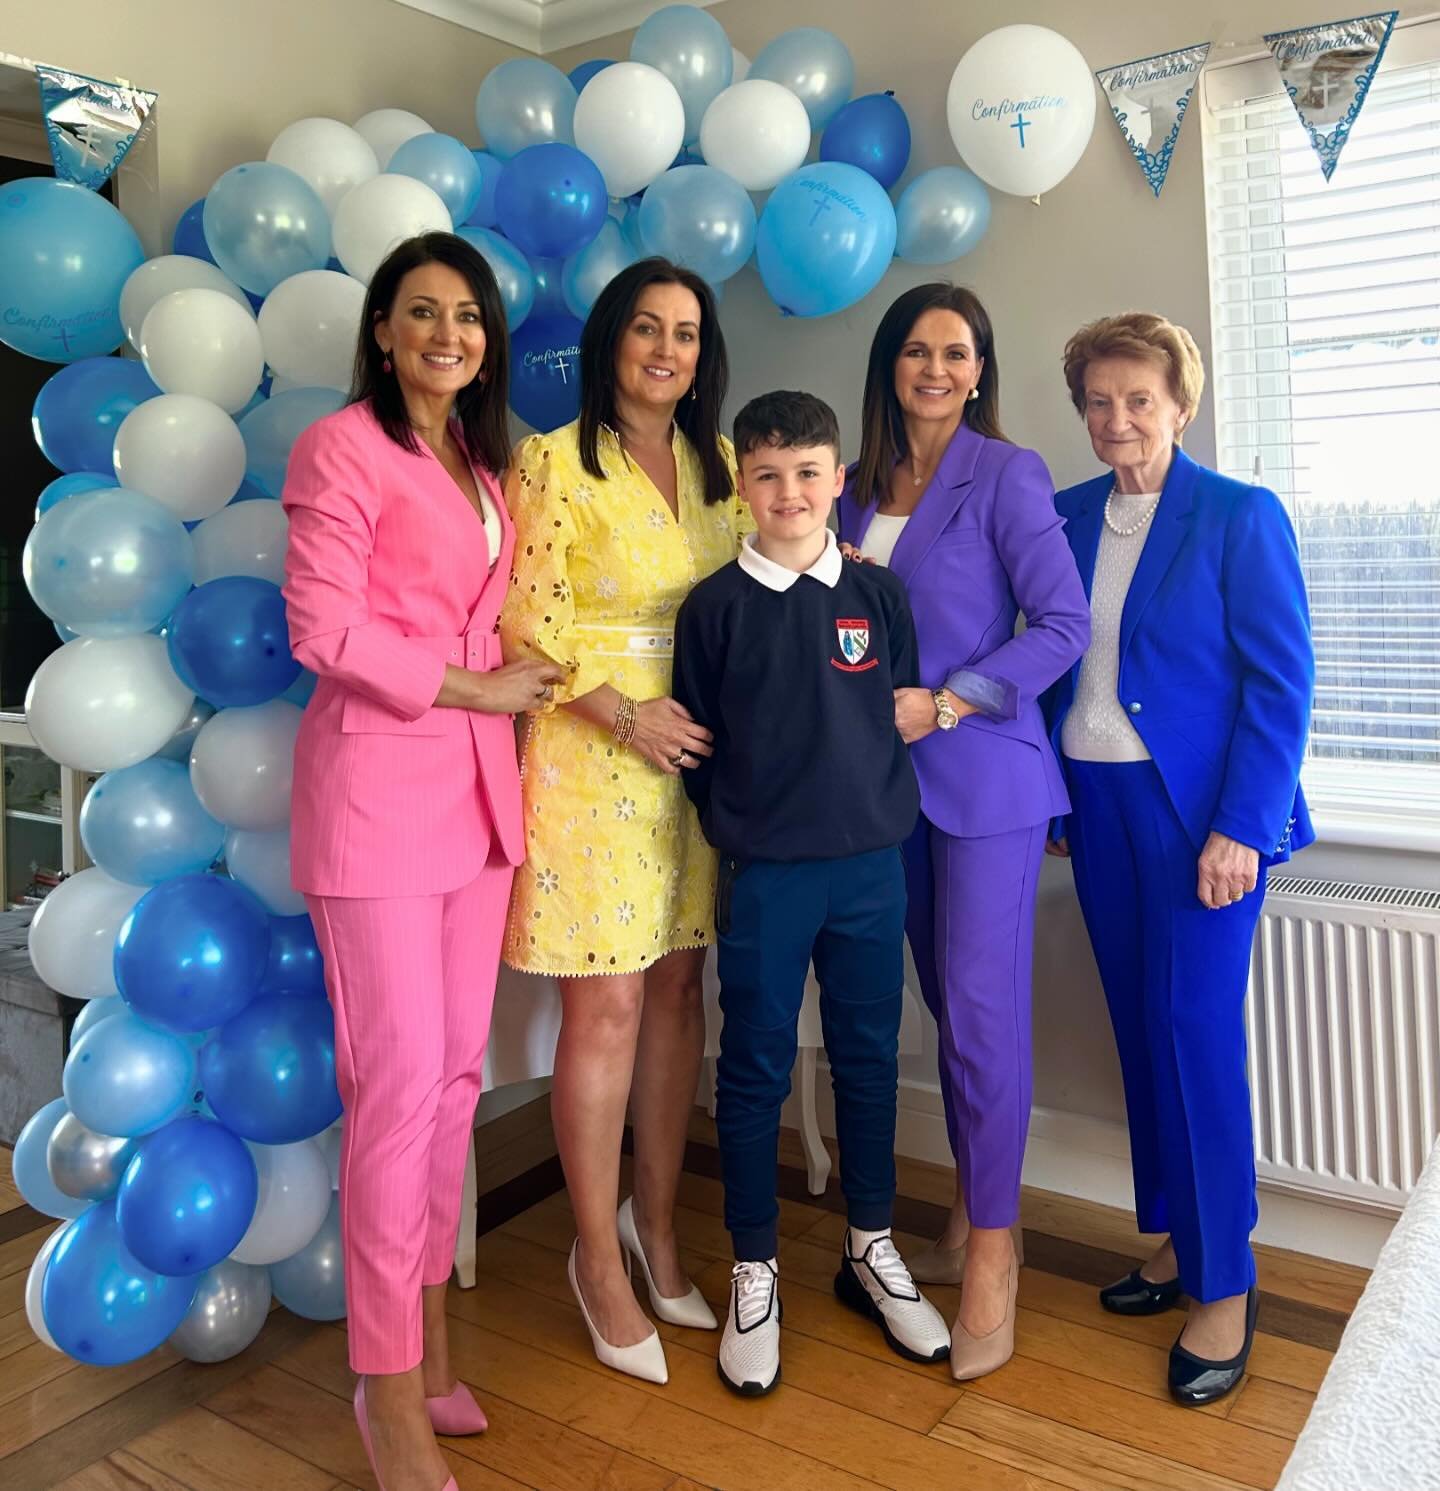 ☀️🥳 My Sisters Gretta &amp; Shelly, My Mother &amp; I all rocking Fusion Fashion style for Dylan&rsquo;s Confirmation yesterday. Suits are a thing 🤩 and Shelly&rsquo;s pop of yellow was just fab for the sunny day. 
Fiona x 
#sisters #family #popofc